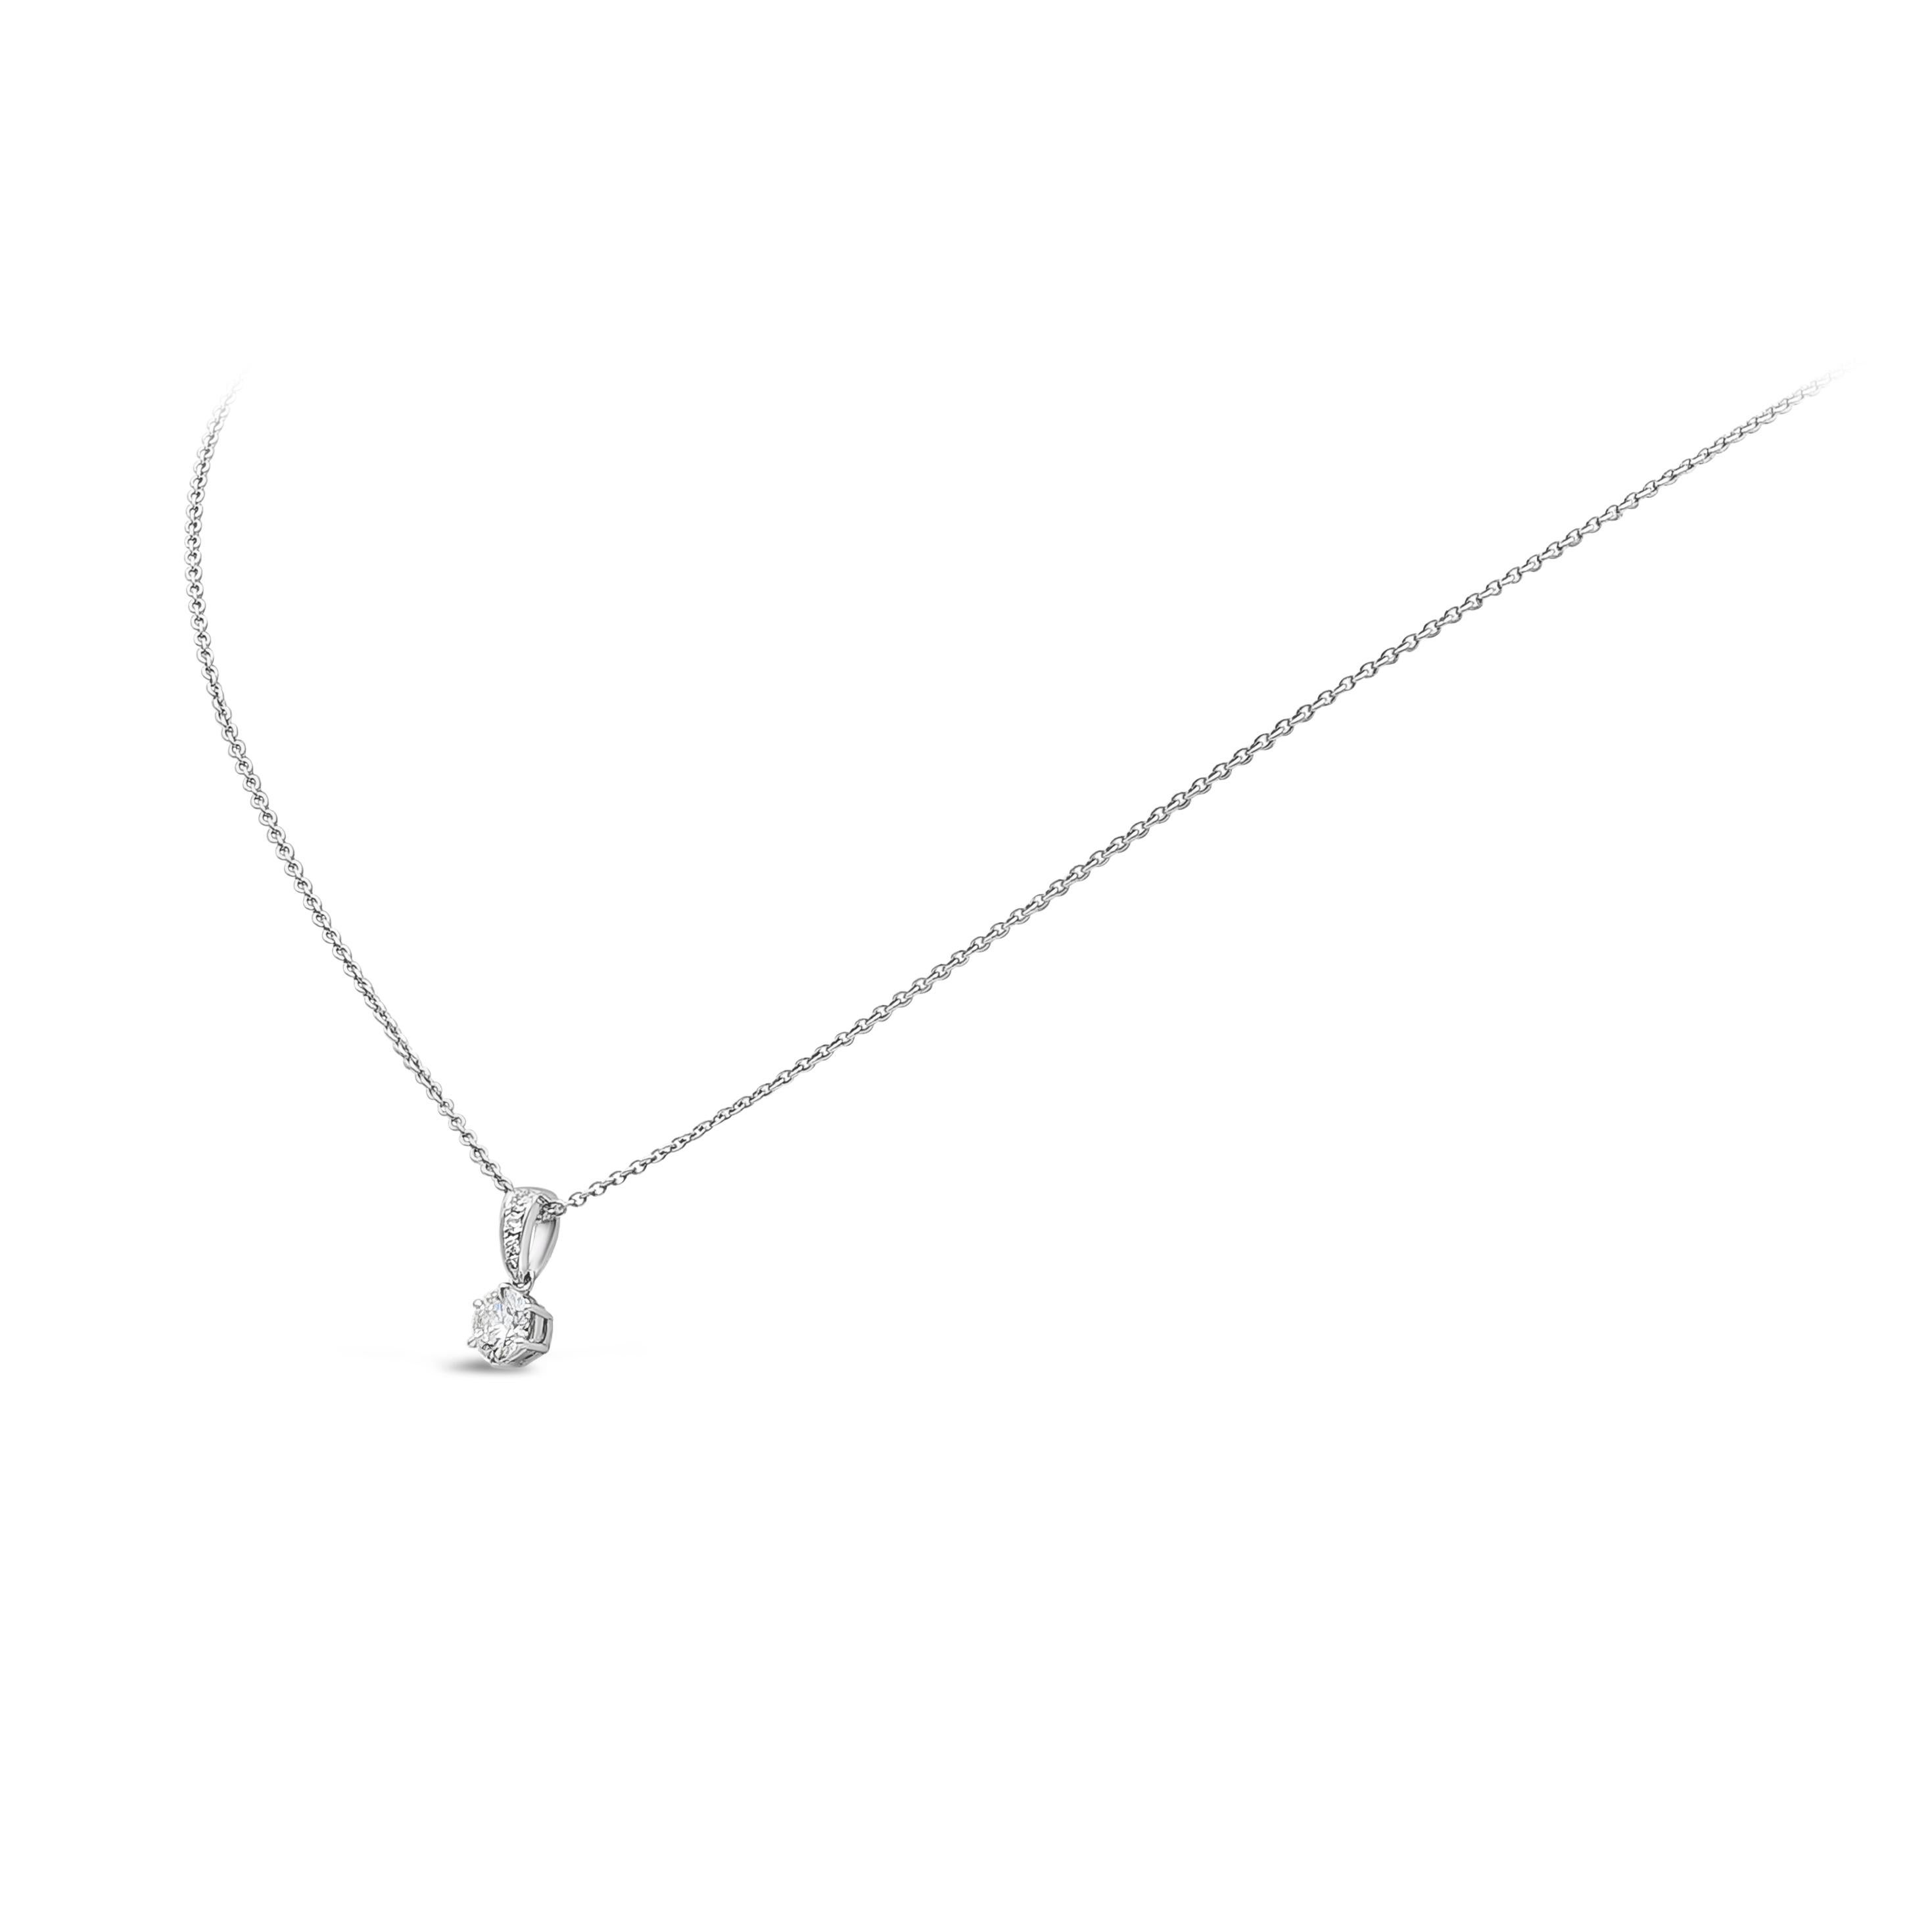 A simple and timeless pendant necklace, featuring a 0.43 carat round brilliant cut diamond beautifully crafted in a six prong basket and suspended on a diamond encrusted bail weighing 0.04 carat. The diamonds are F-G color and SI1-SI3 clarity. Made